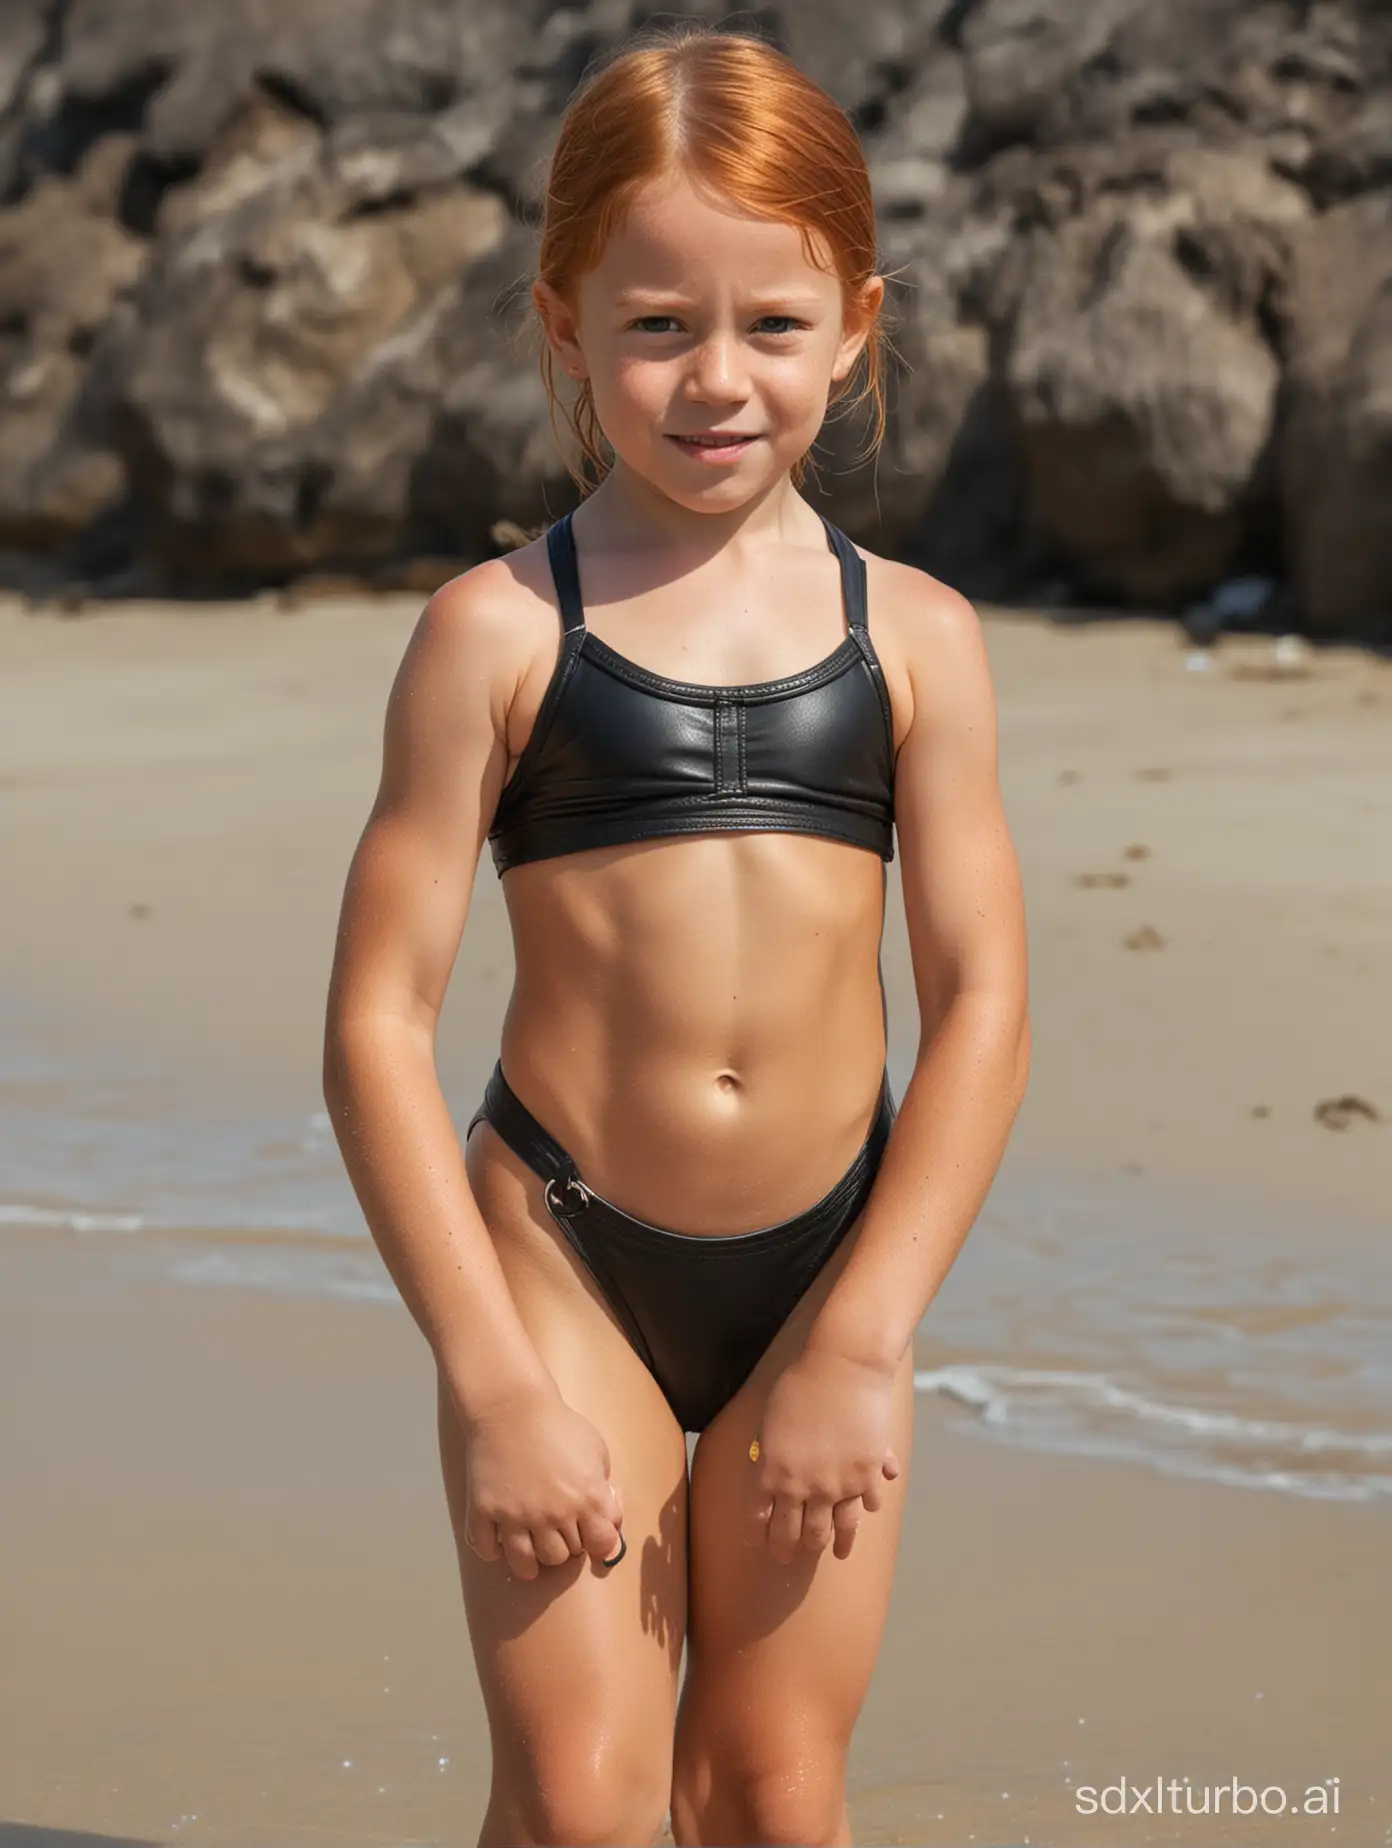 Muscular-GingerHaired-Girl-in-Leather-Bathing-Suit-at-Odessa-Beach